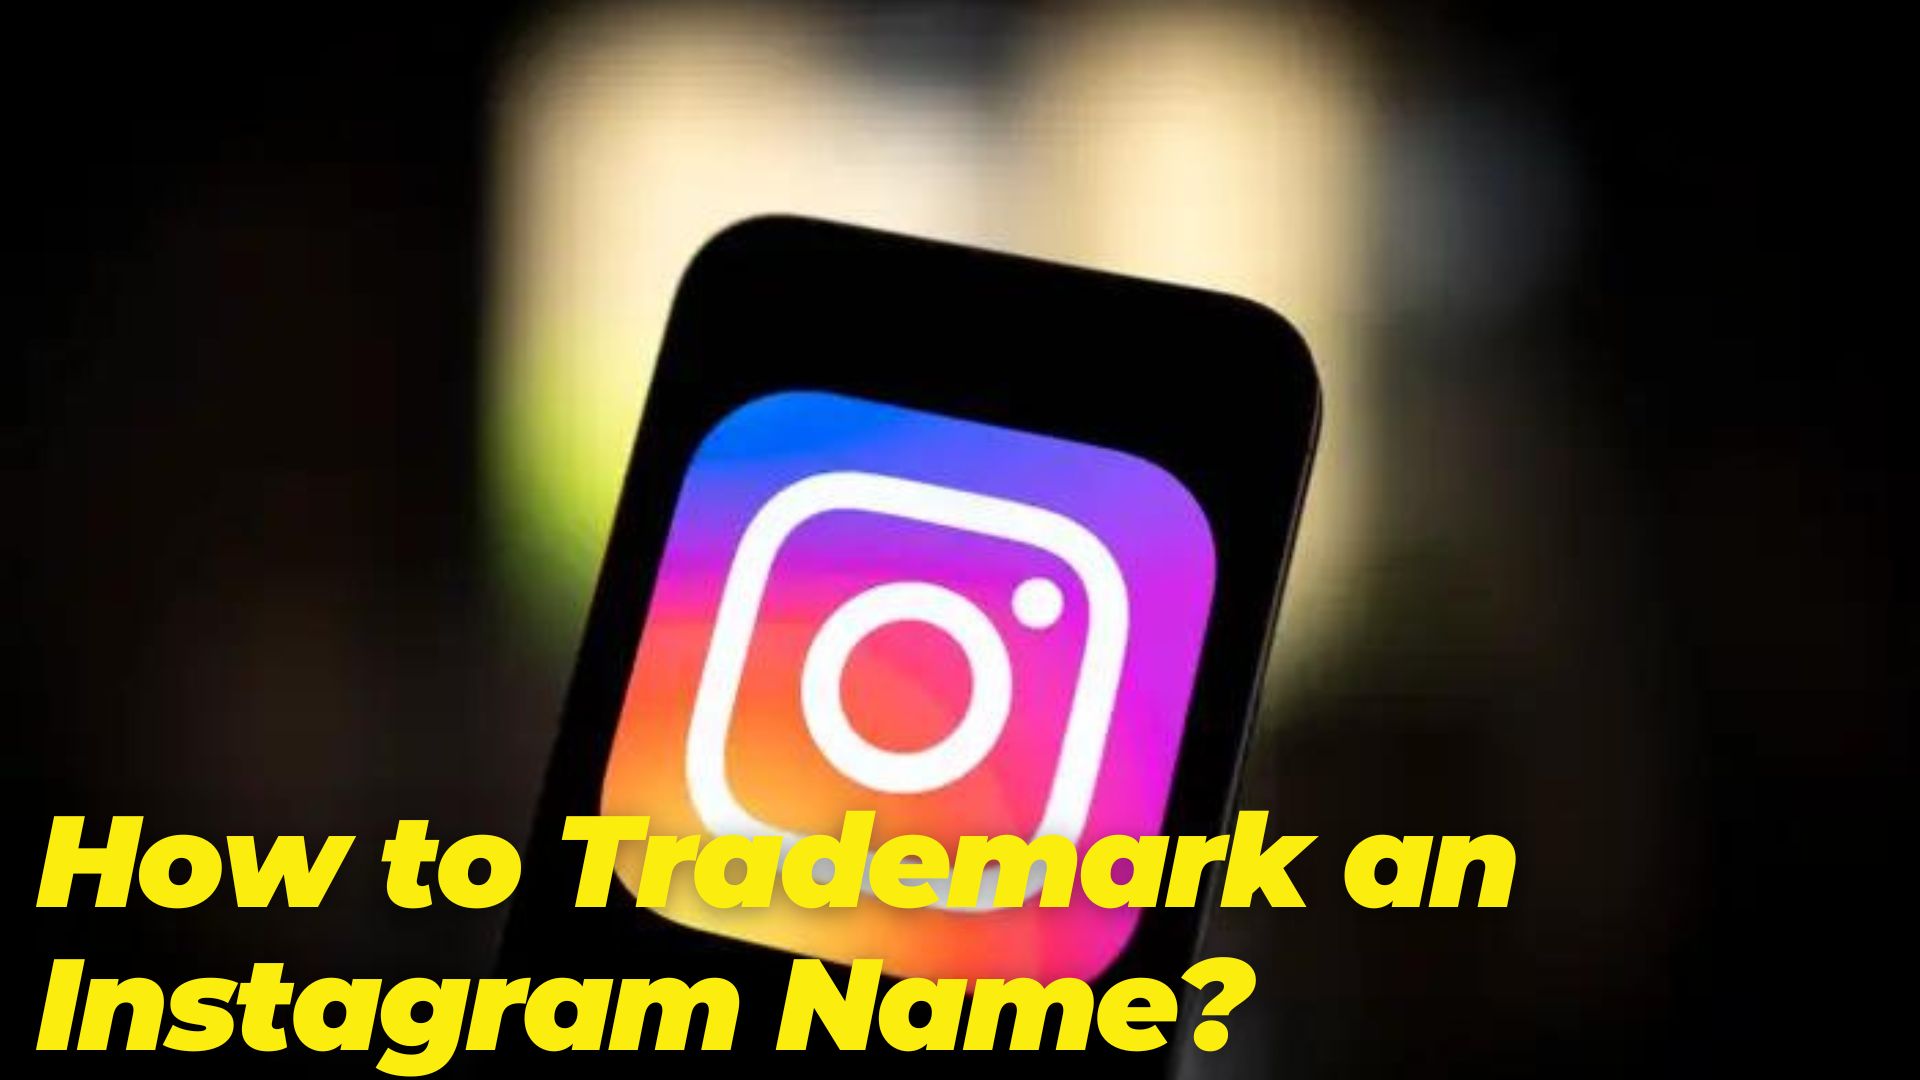 How to Trademark an Instagram Name?